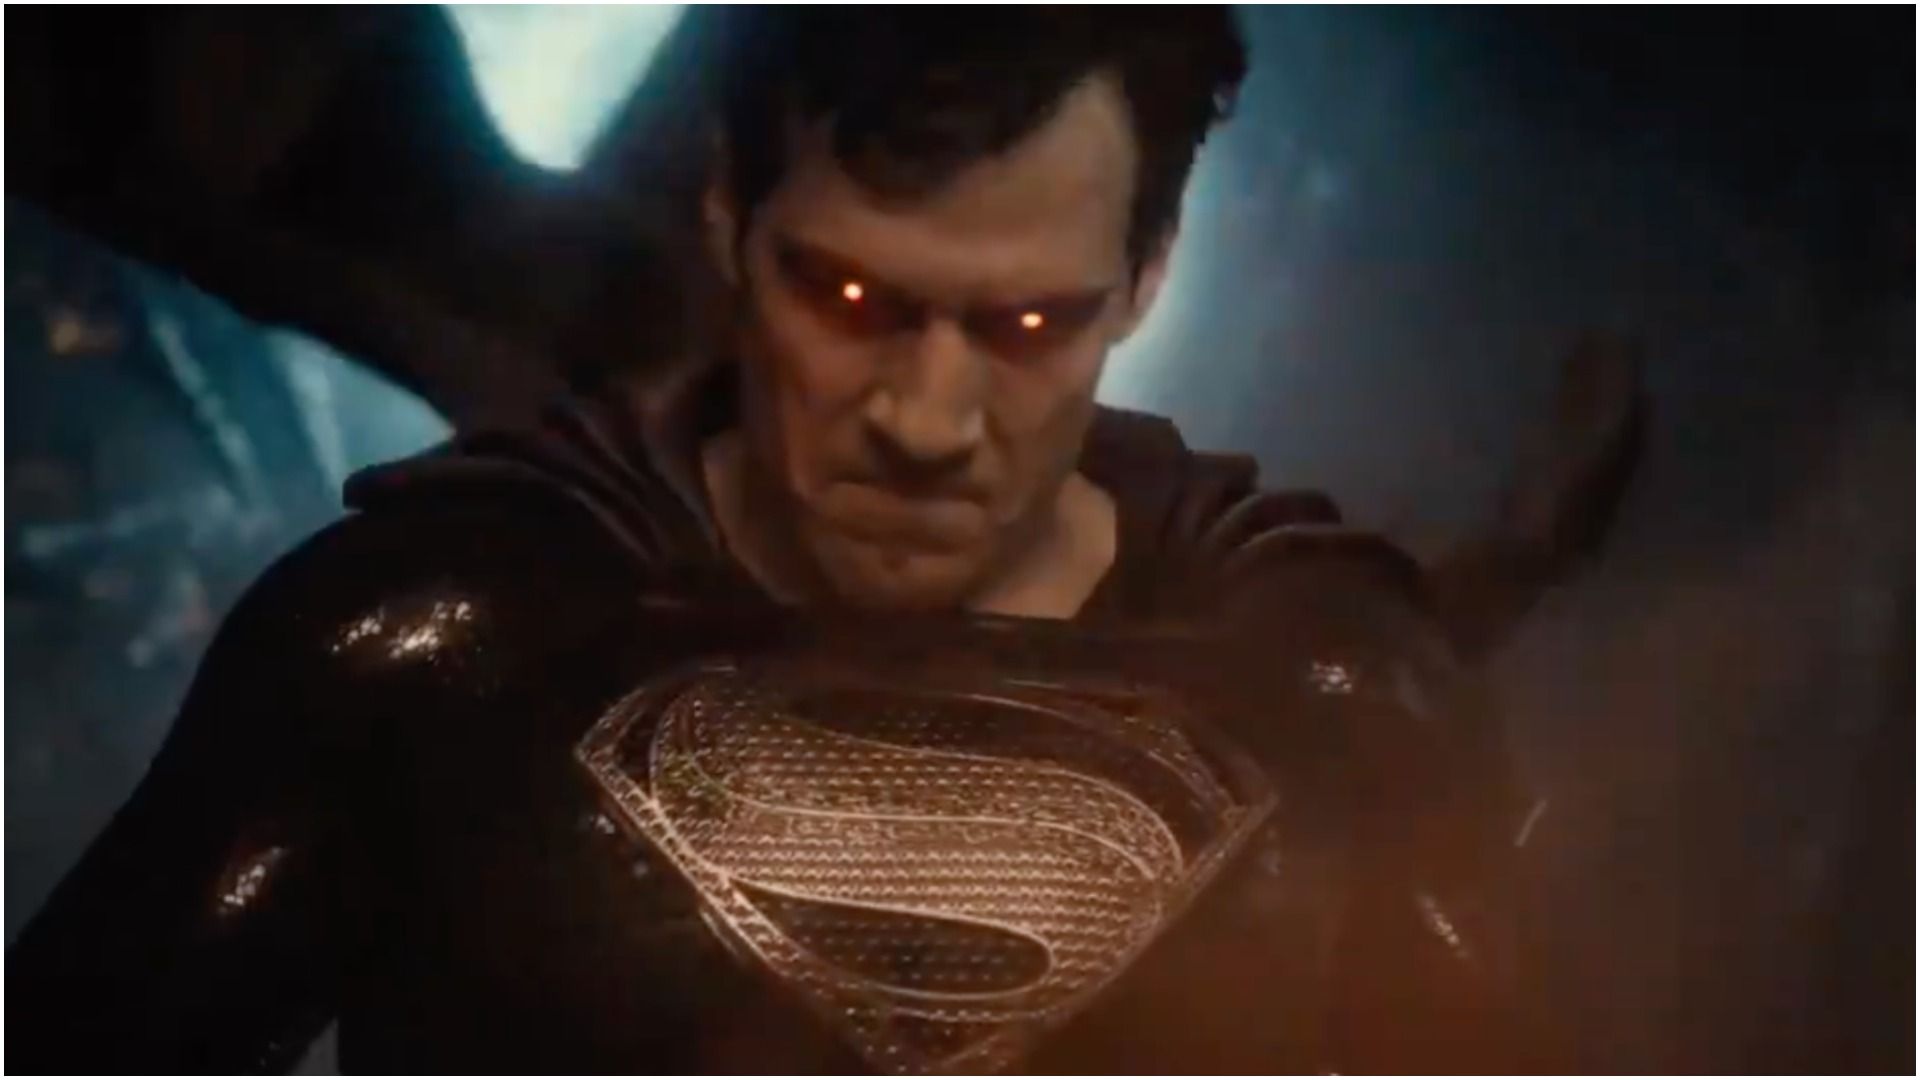 New Zack Snyder's Justice League teaser trailer shows black suit Superman and more